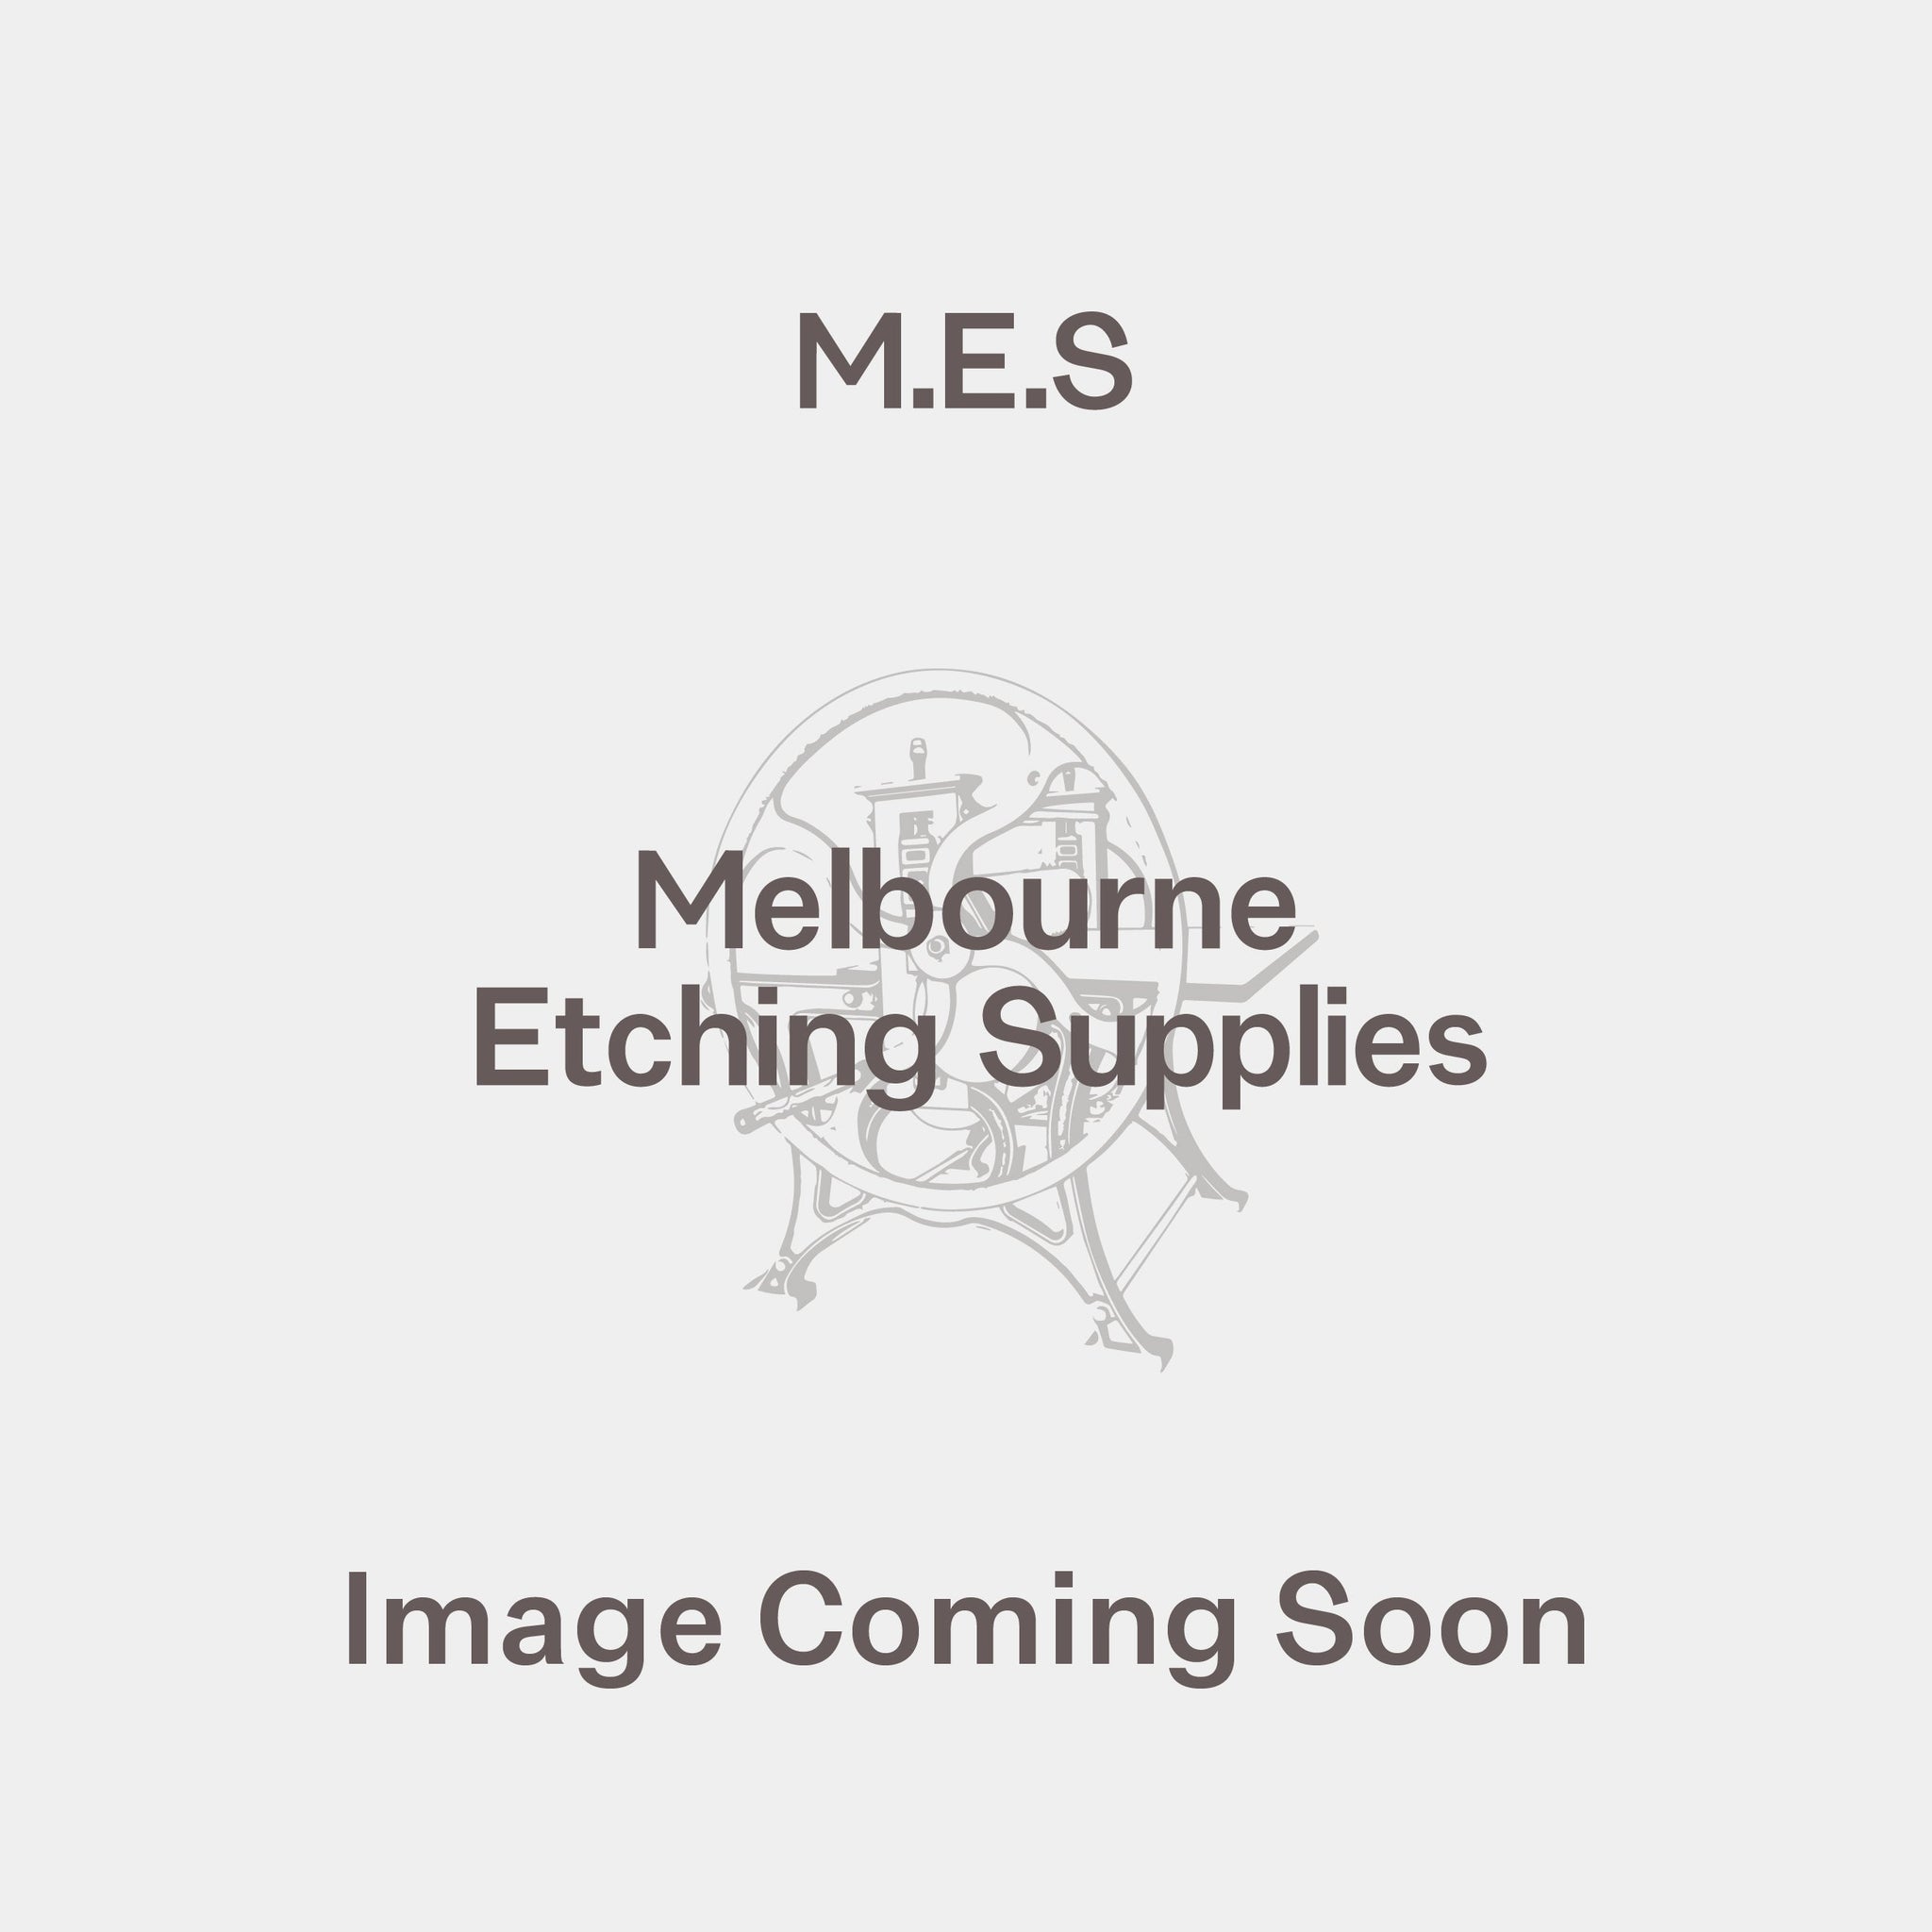 Fabriano Medioevalis Folded Card - Melbourne Etching Supplies